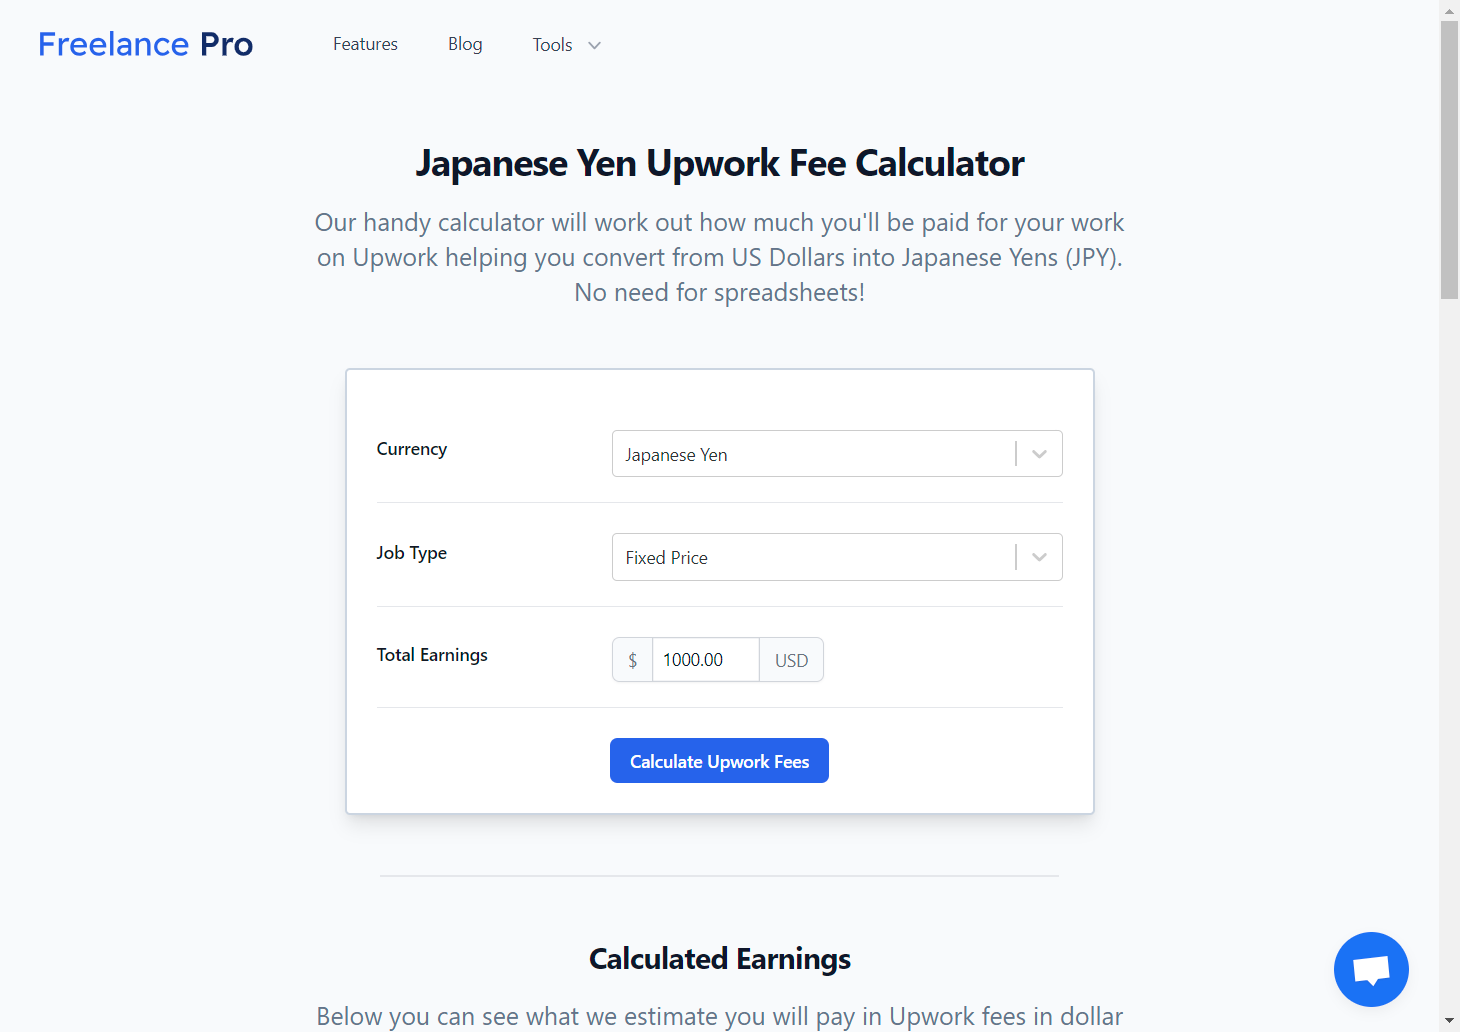 The image is a screenshot of a webpage titled "Freelance Pro Japanese Yen Upwork Fee Calculator". It presents an online calculator designed to help users determine how much they will be paid for their work on Upwork by converting US Dollars into Japanese Yen (JPY), indicating a tool to assist with currency conversion and fee calculations without the need for manual spreadsheets.